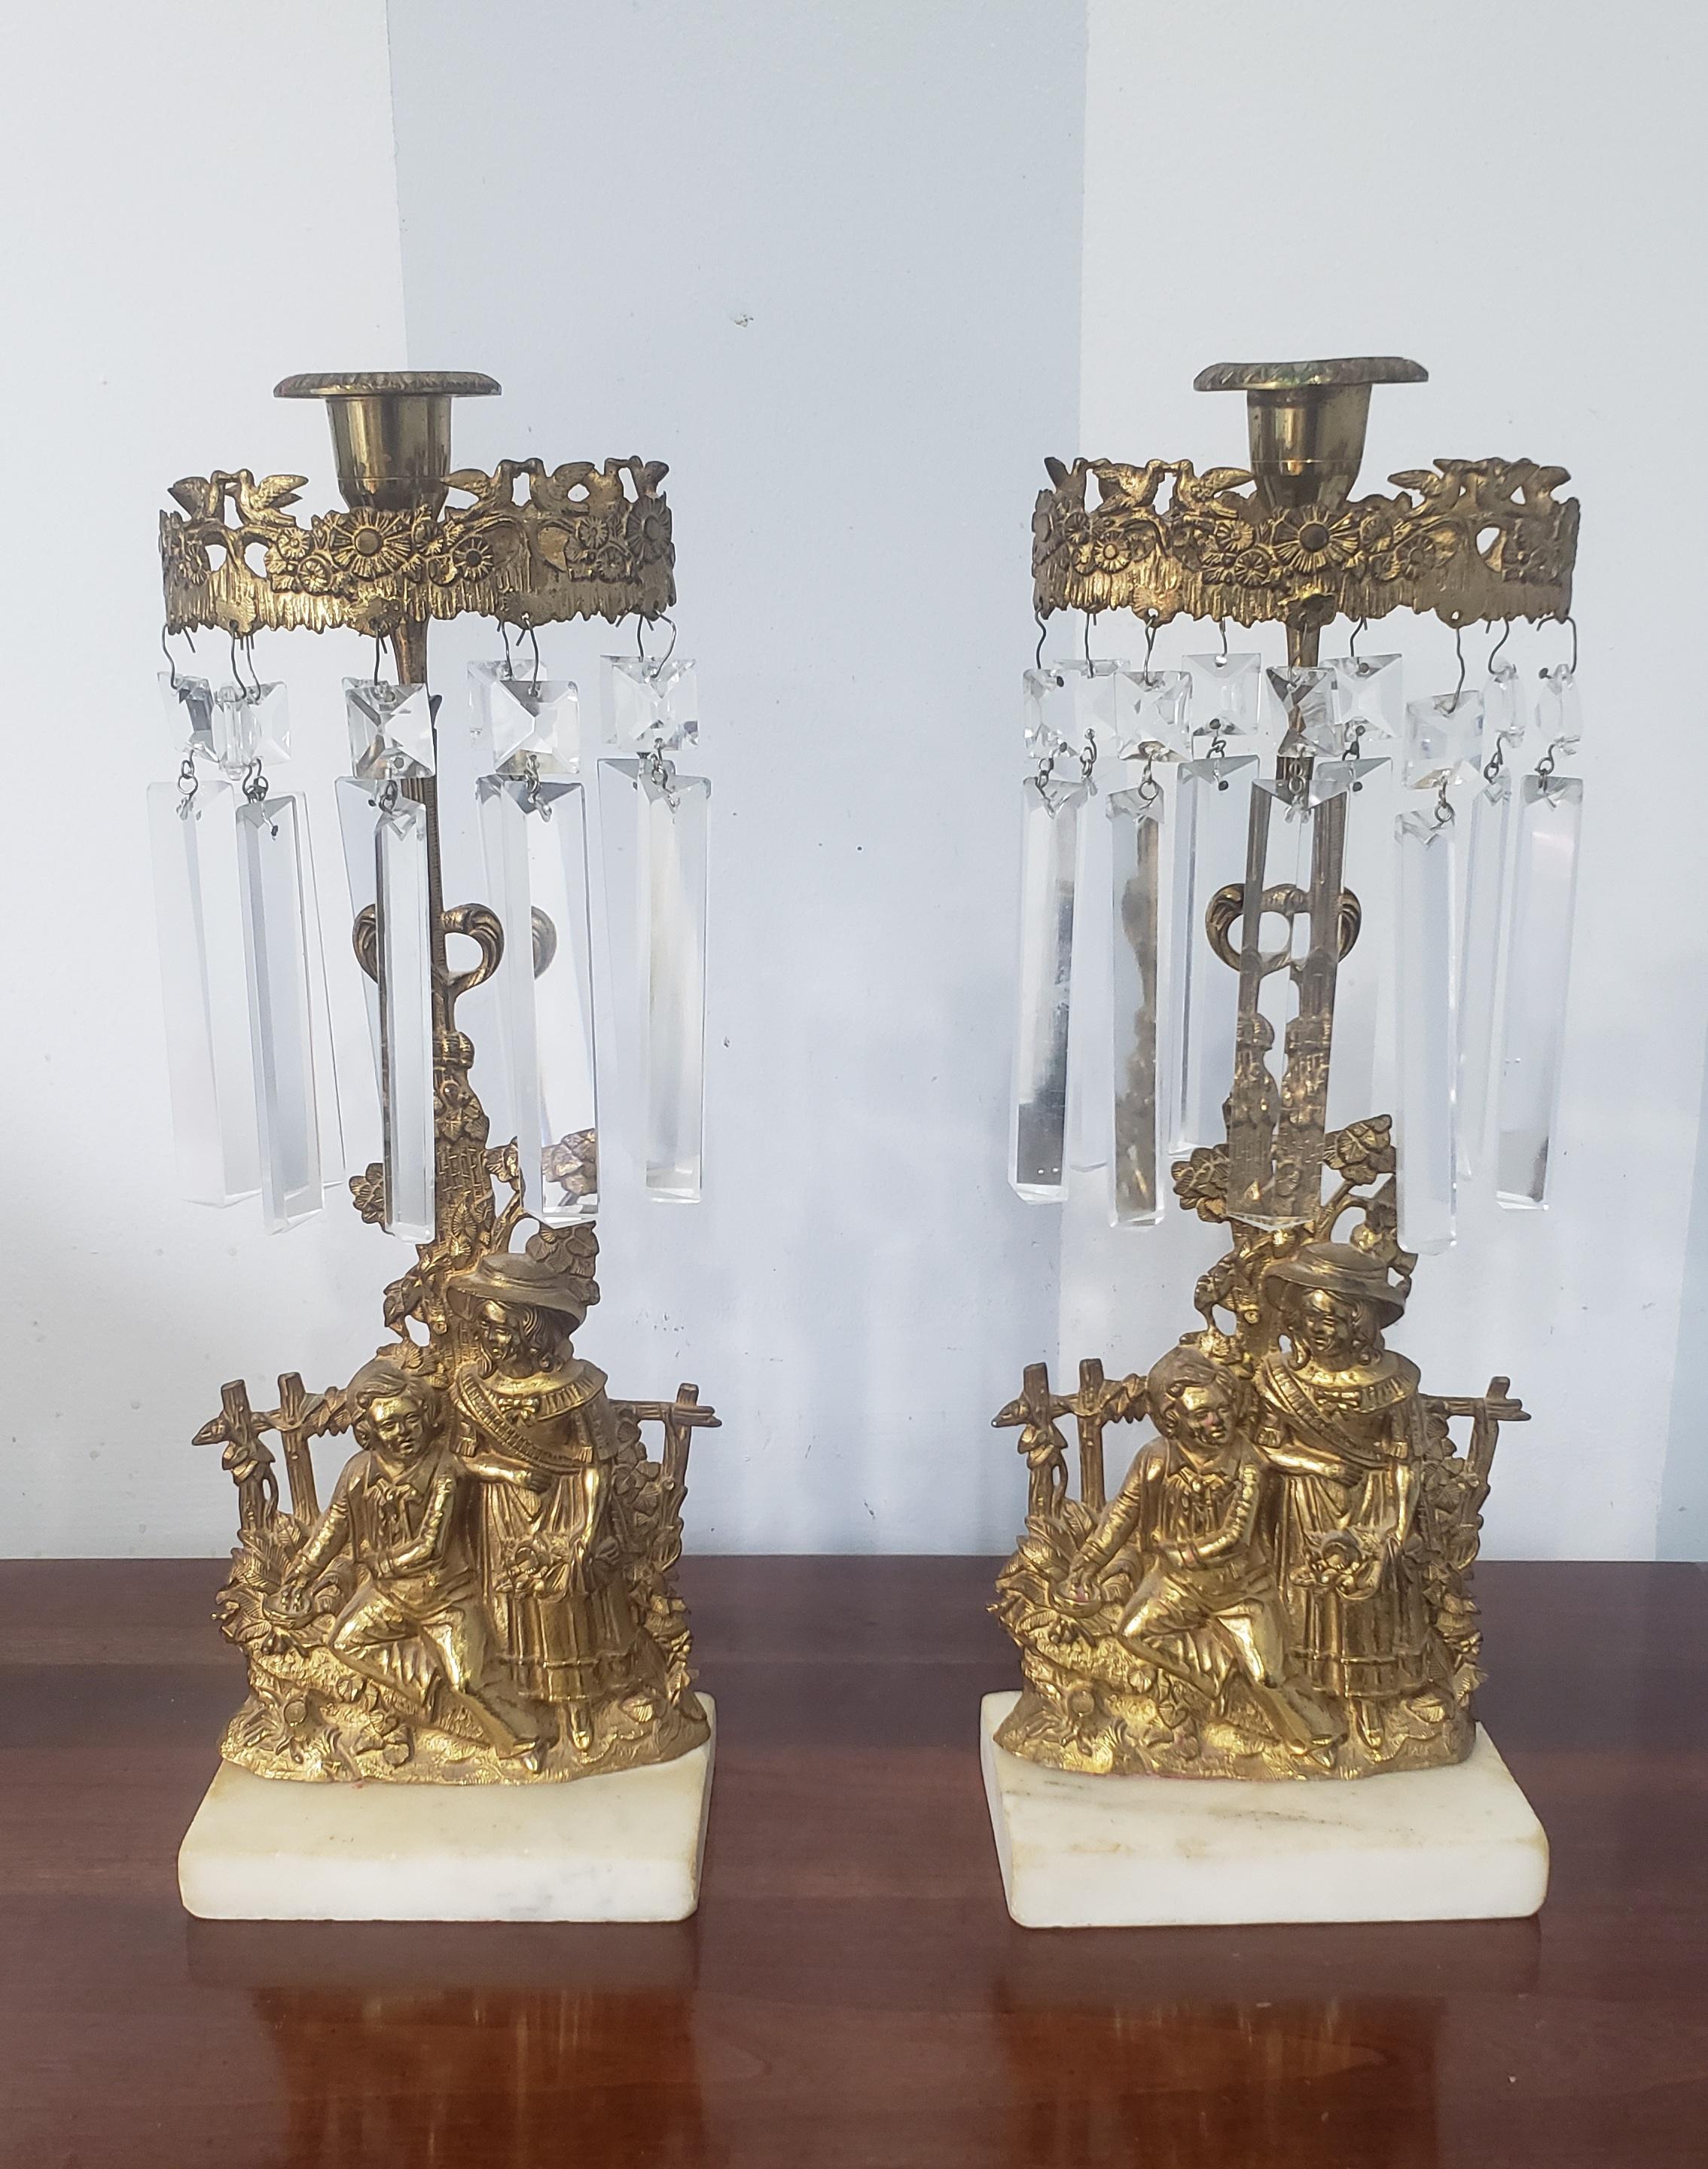 A pair of 1840s Cornelius and Co. Cast Brass & Marble Girandole Candlesticks with crystal pendulums.
Measures 13.25